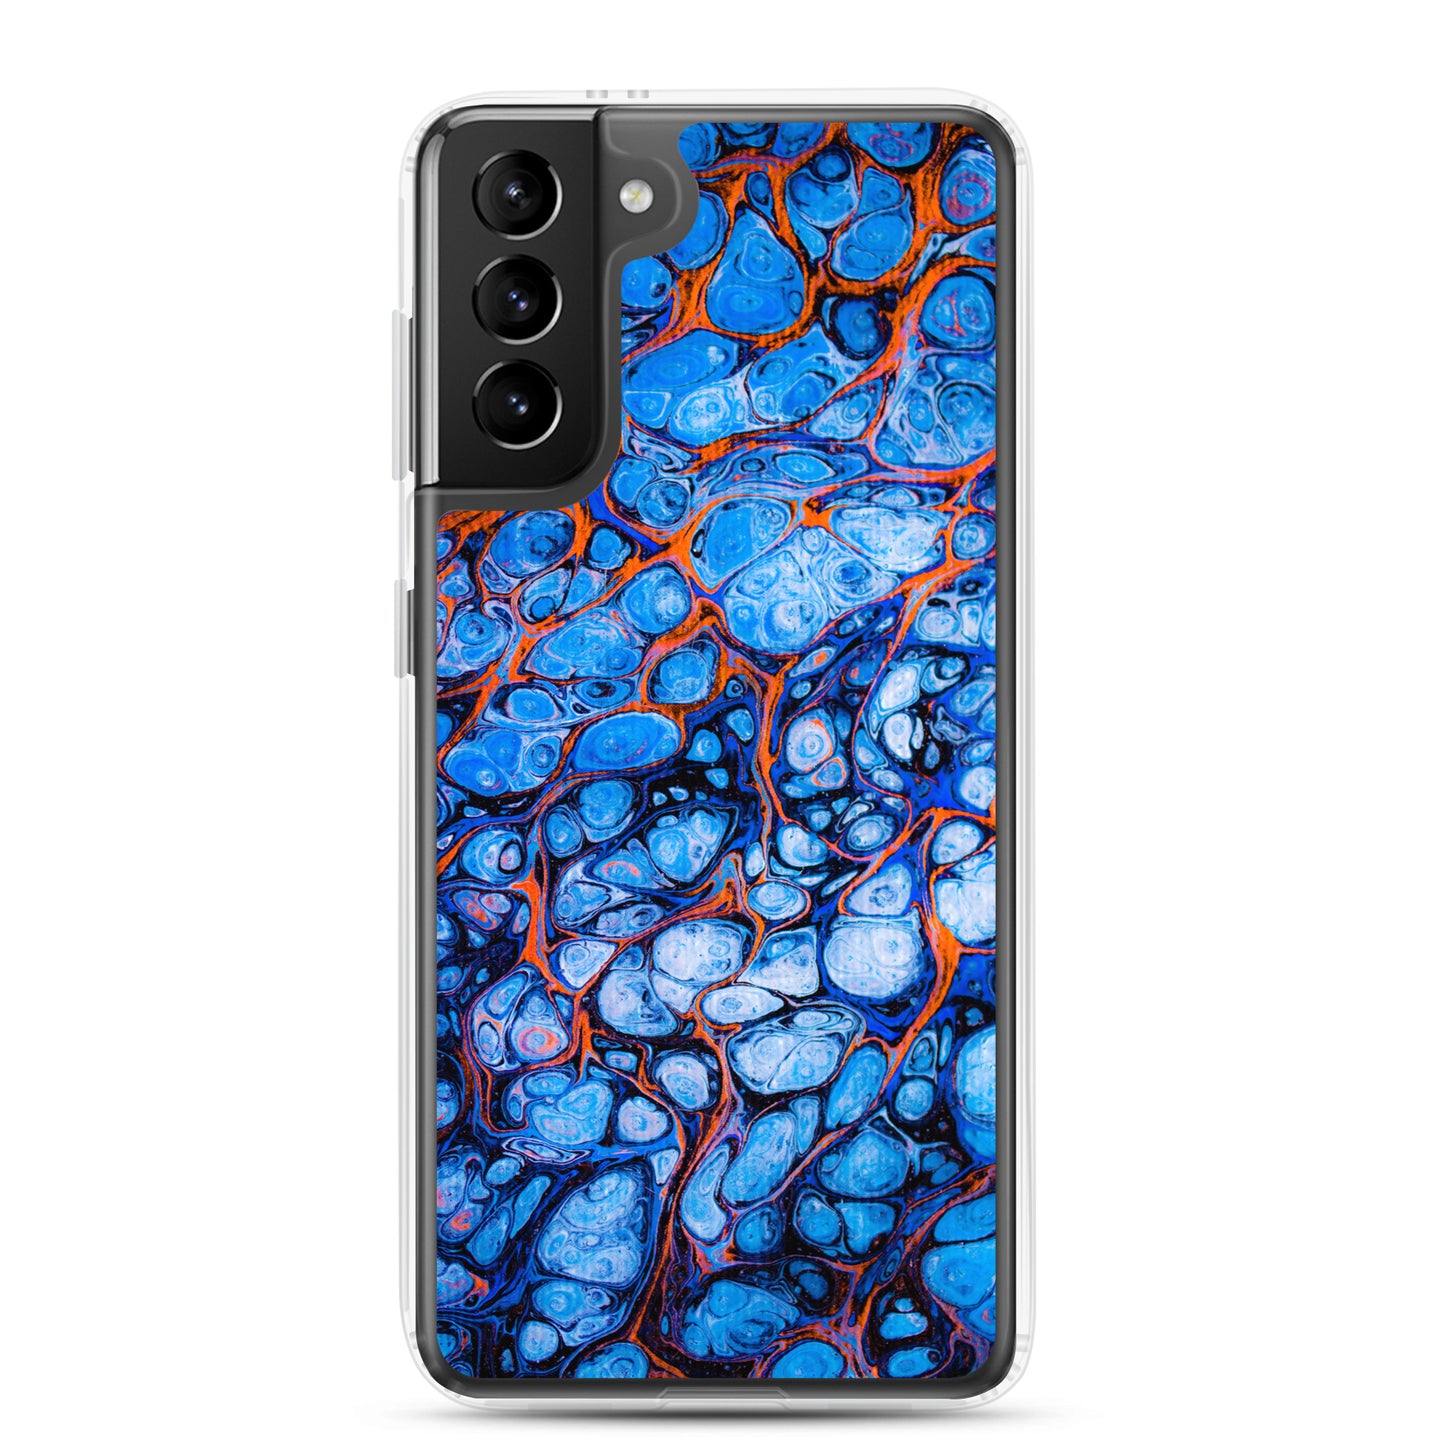 NightOwl Studio Custom Phone Case Compatible with Samsung Galaxy, Slim Cover for Wireless Charging, Drop and Scratch Resistant, Blue Fire